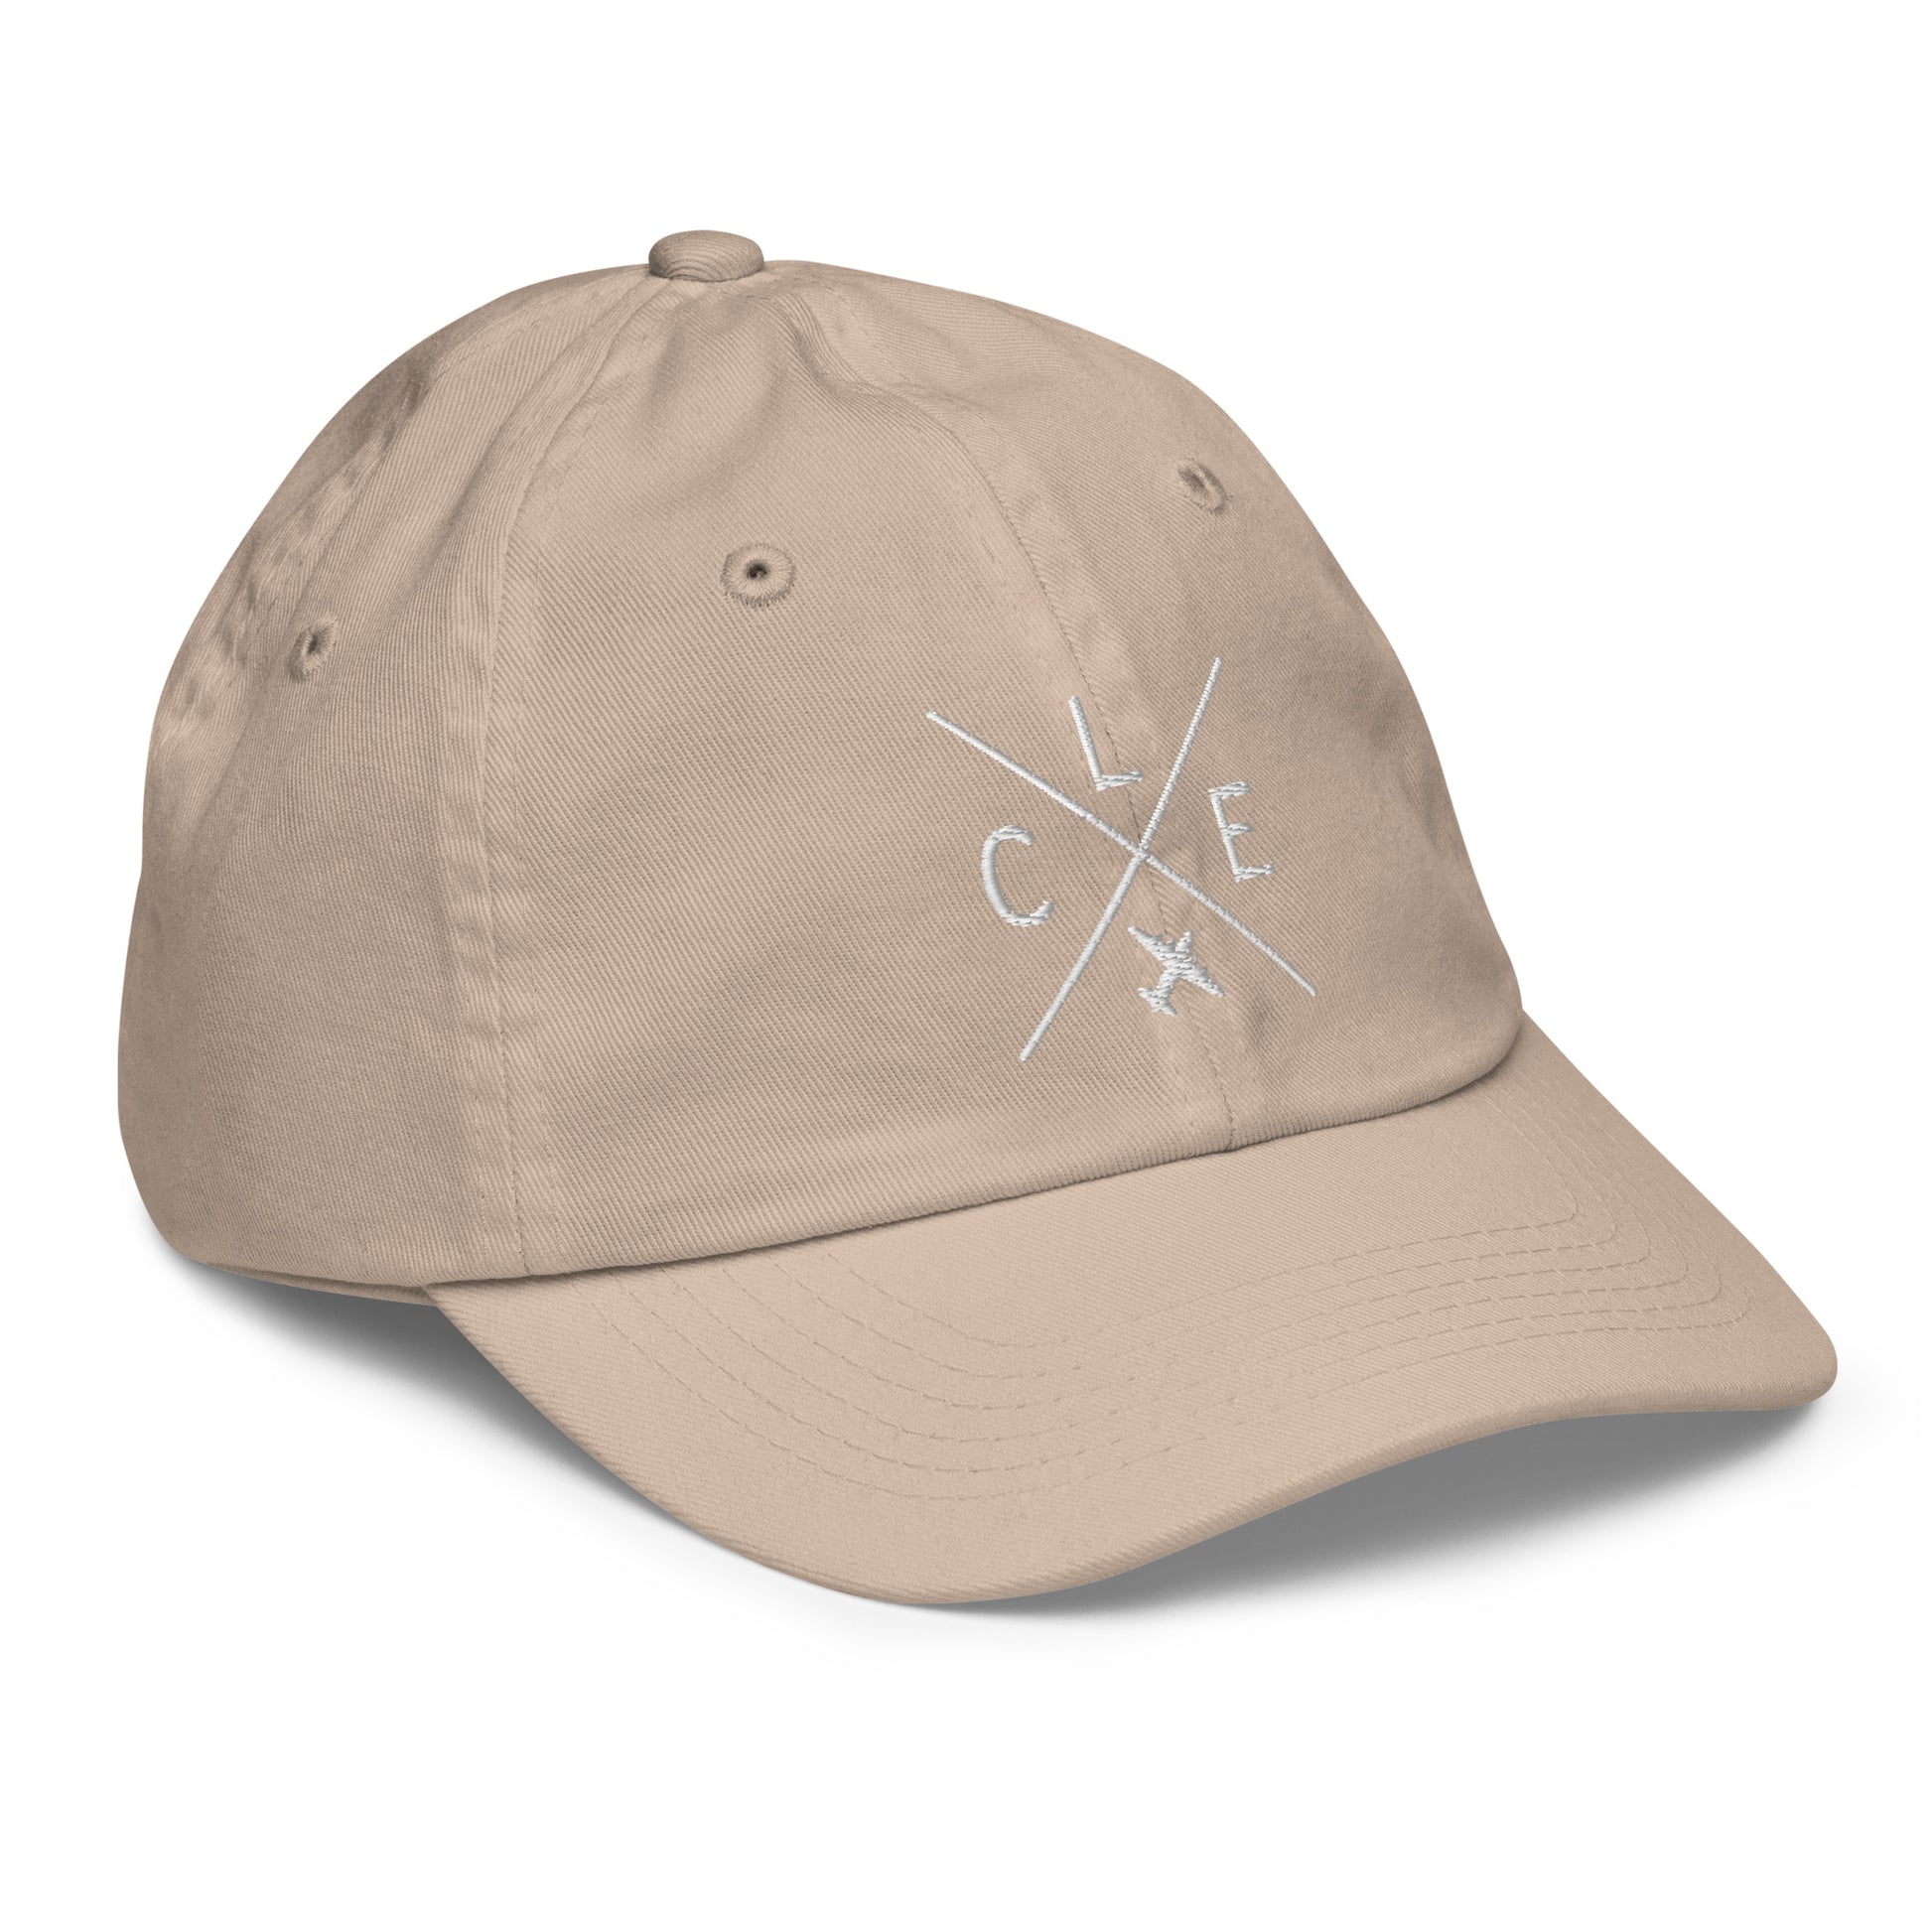 Crossed-X Kid's Baseball Cap - White • CLE Cleveland • YHM Designs - Image 29